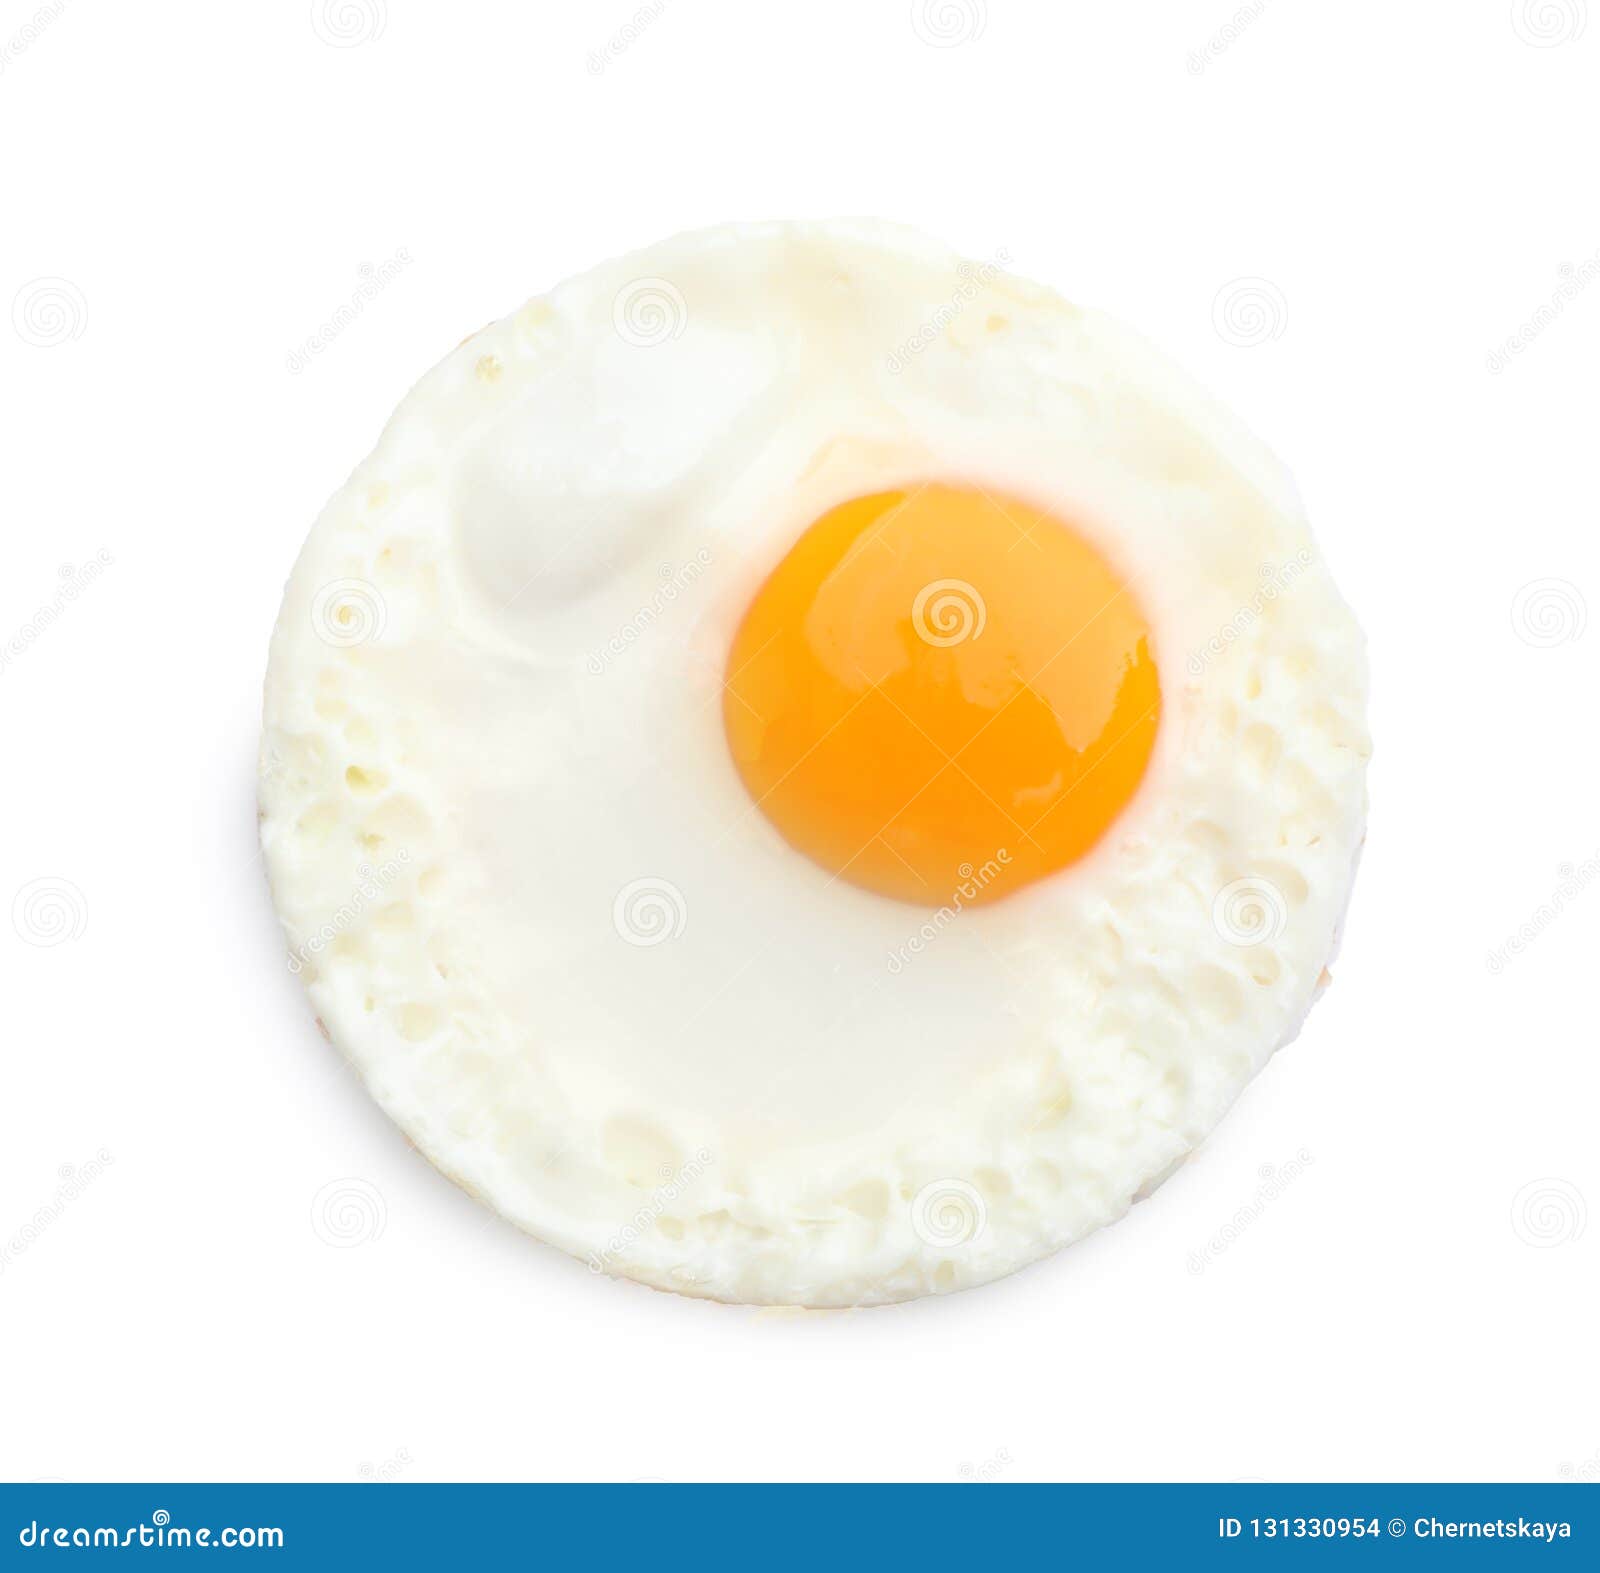 https://thumbs.dreamstime.com/z/fried-sunny-side-up-egg-white-background-top-view-131330954.jpg